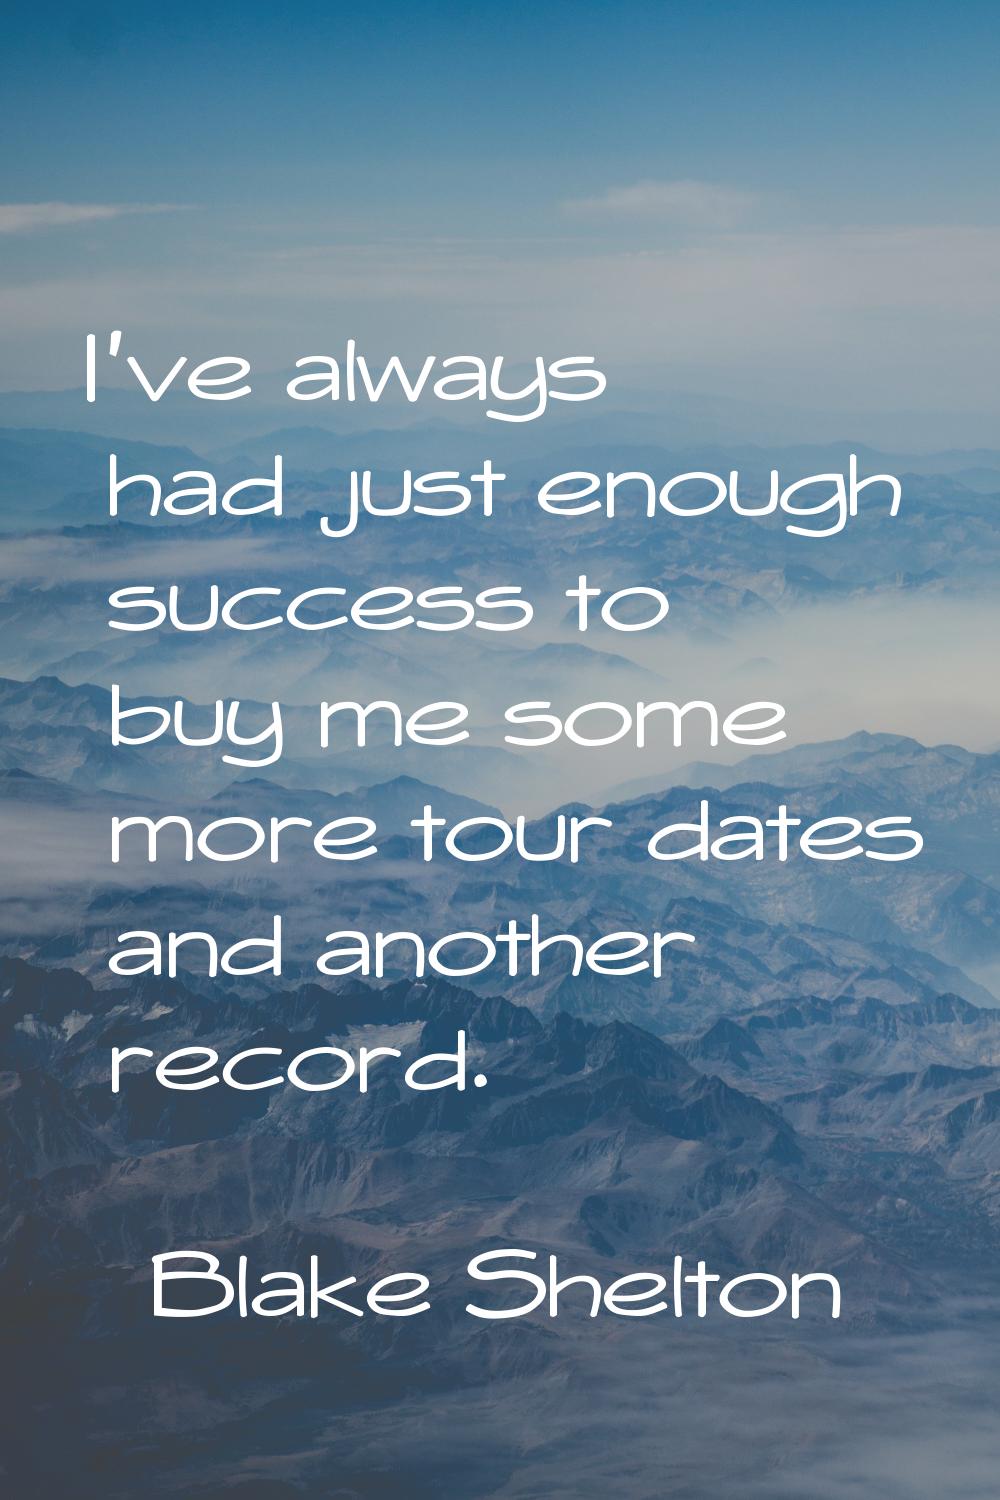 I've always had just enough success to buy me some more tour dates and another record.